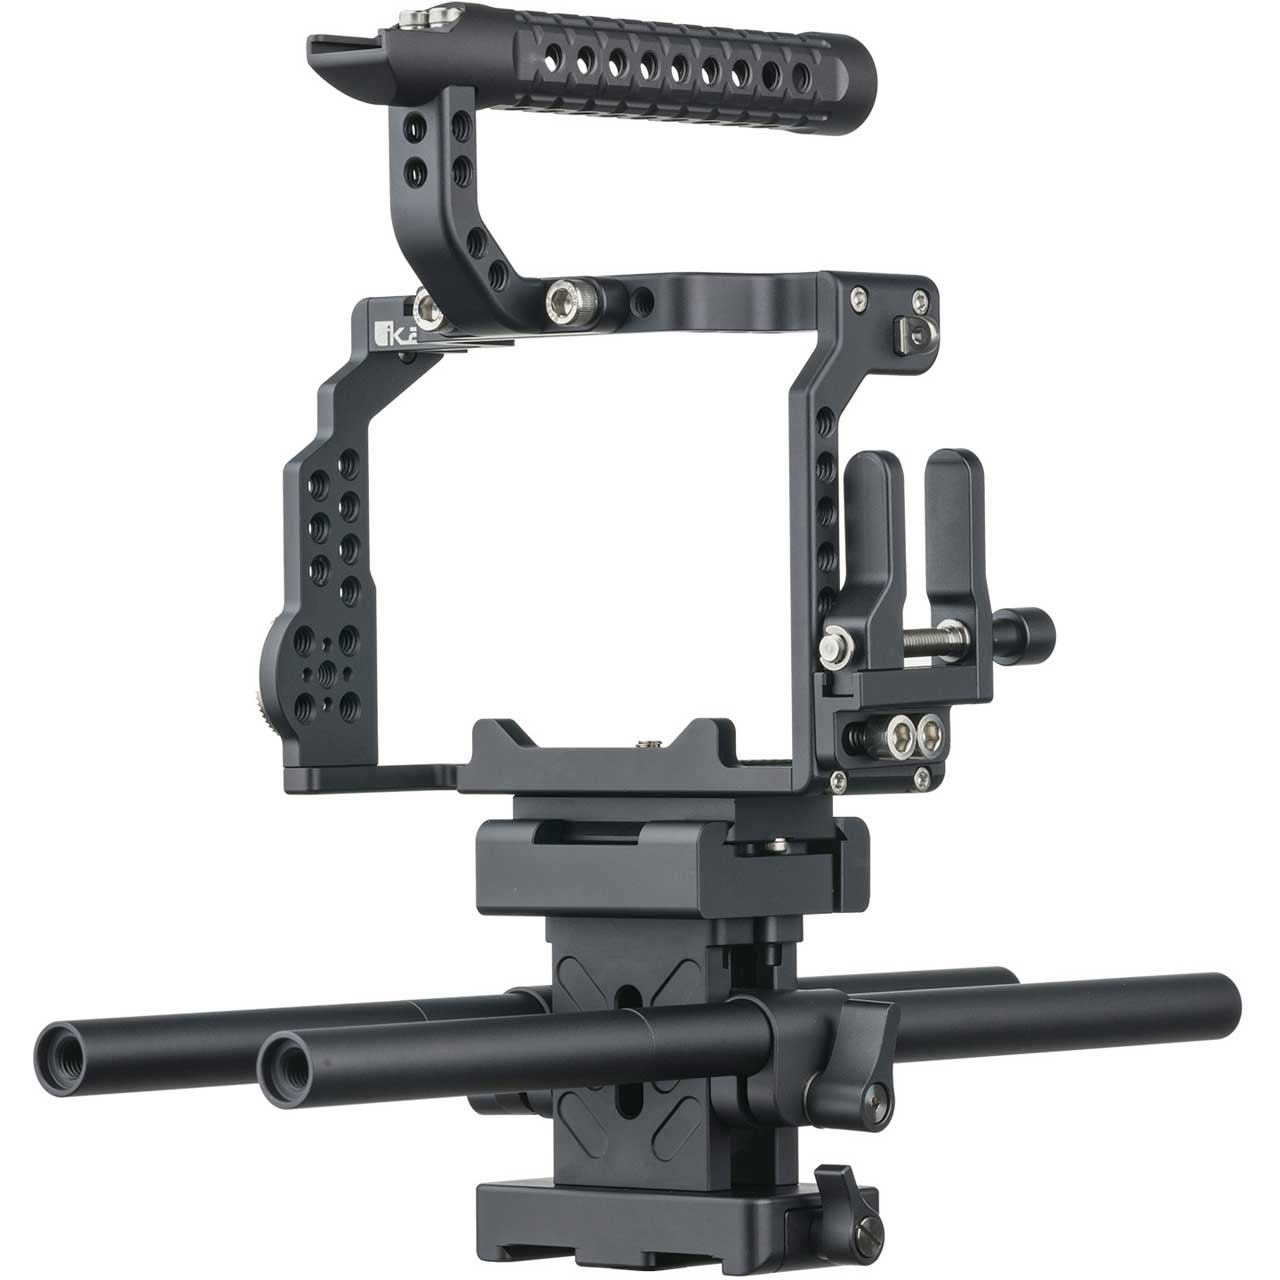 ikan STR-A7III STRATUS Complete Cage for Sony a7 III Series Cameras IKAN-STR-A7III